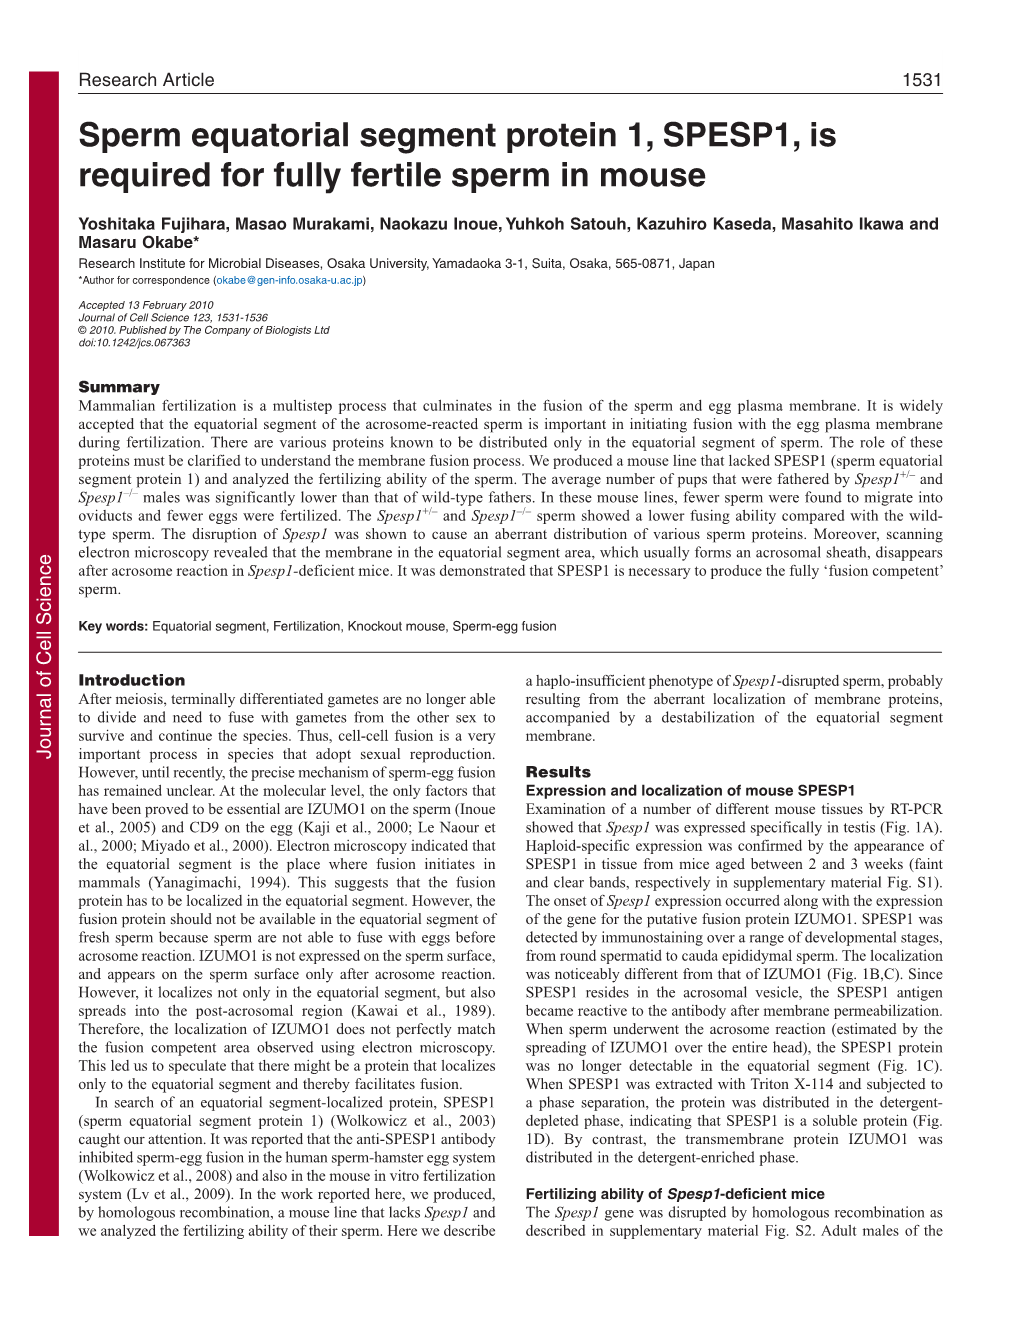 Sperm Equatorial Segment Protein 1, SPESP1, Is Required for Fully Fertile Sperm in Mouse